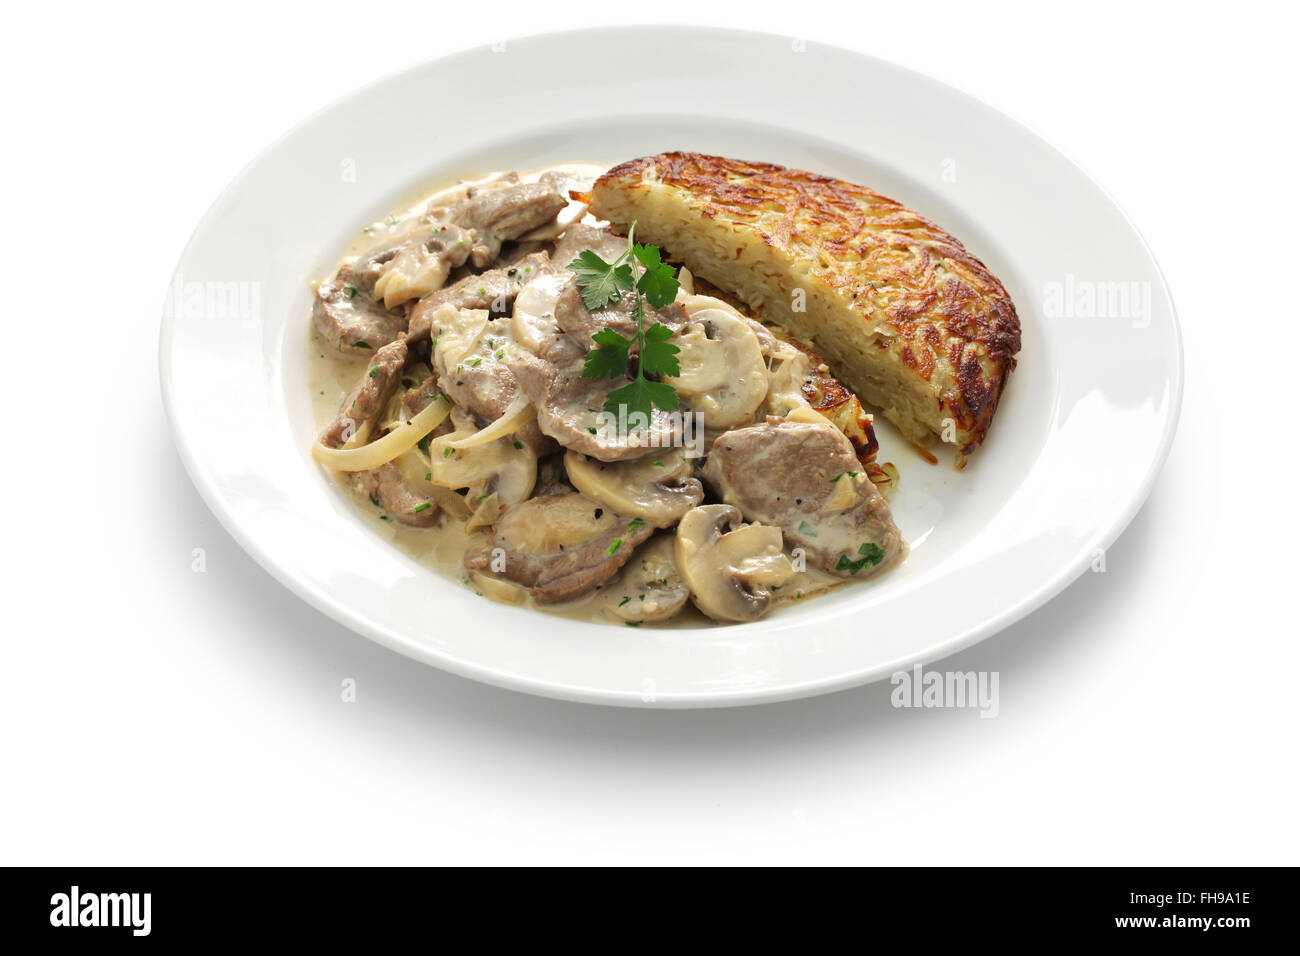 Zurich style veal stew and rosti potato, Swiss cuisine Stock Photo